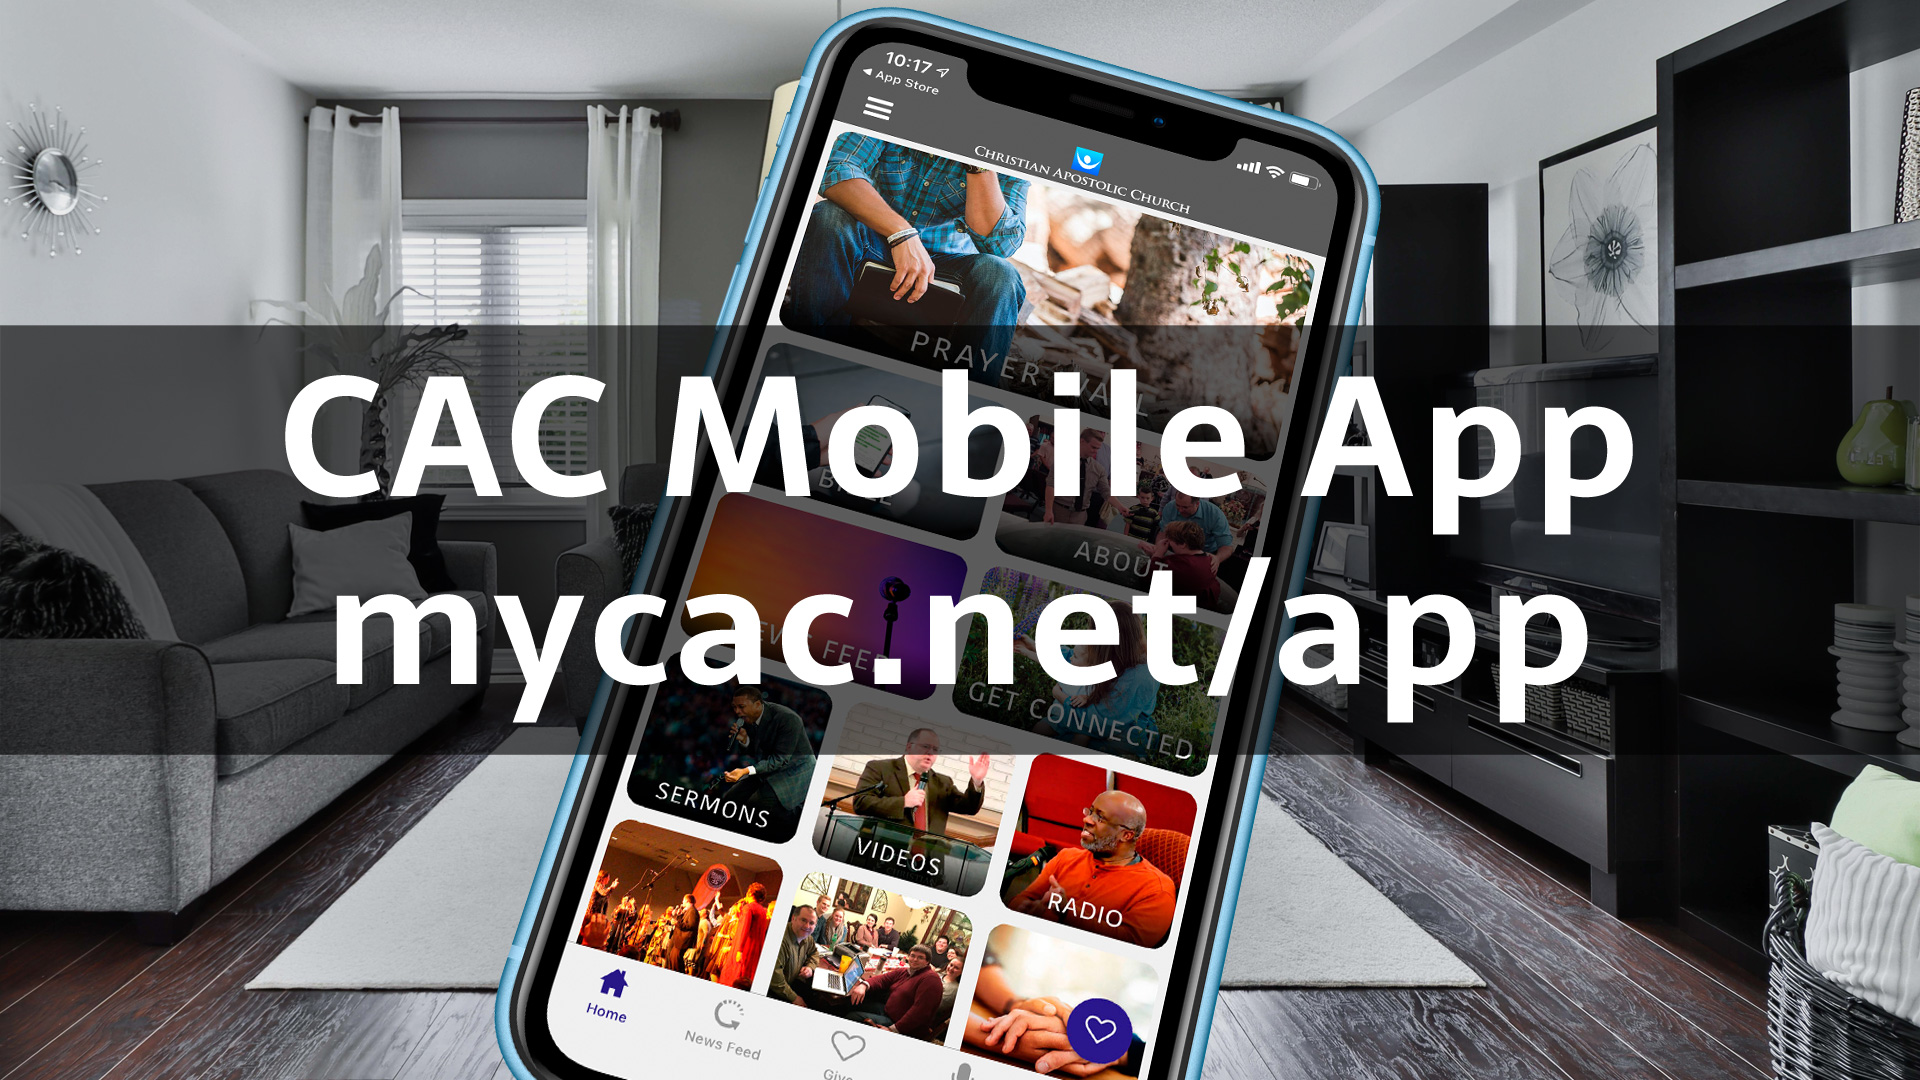 Install CAC mobile app on phone/tablet